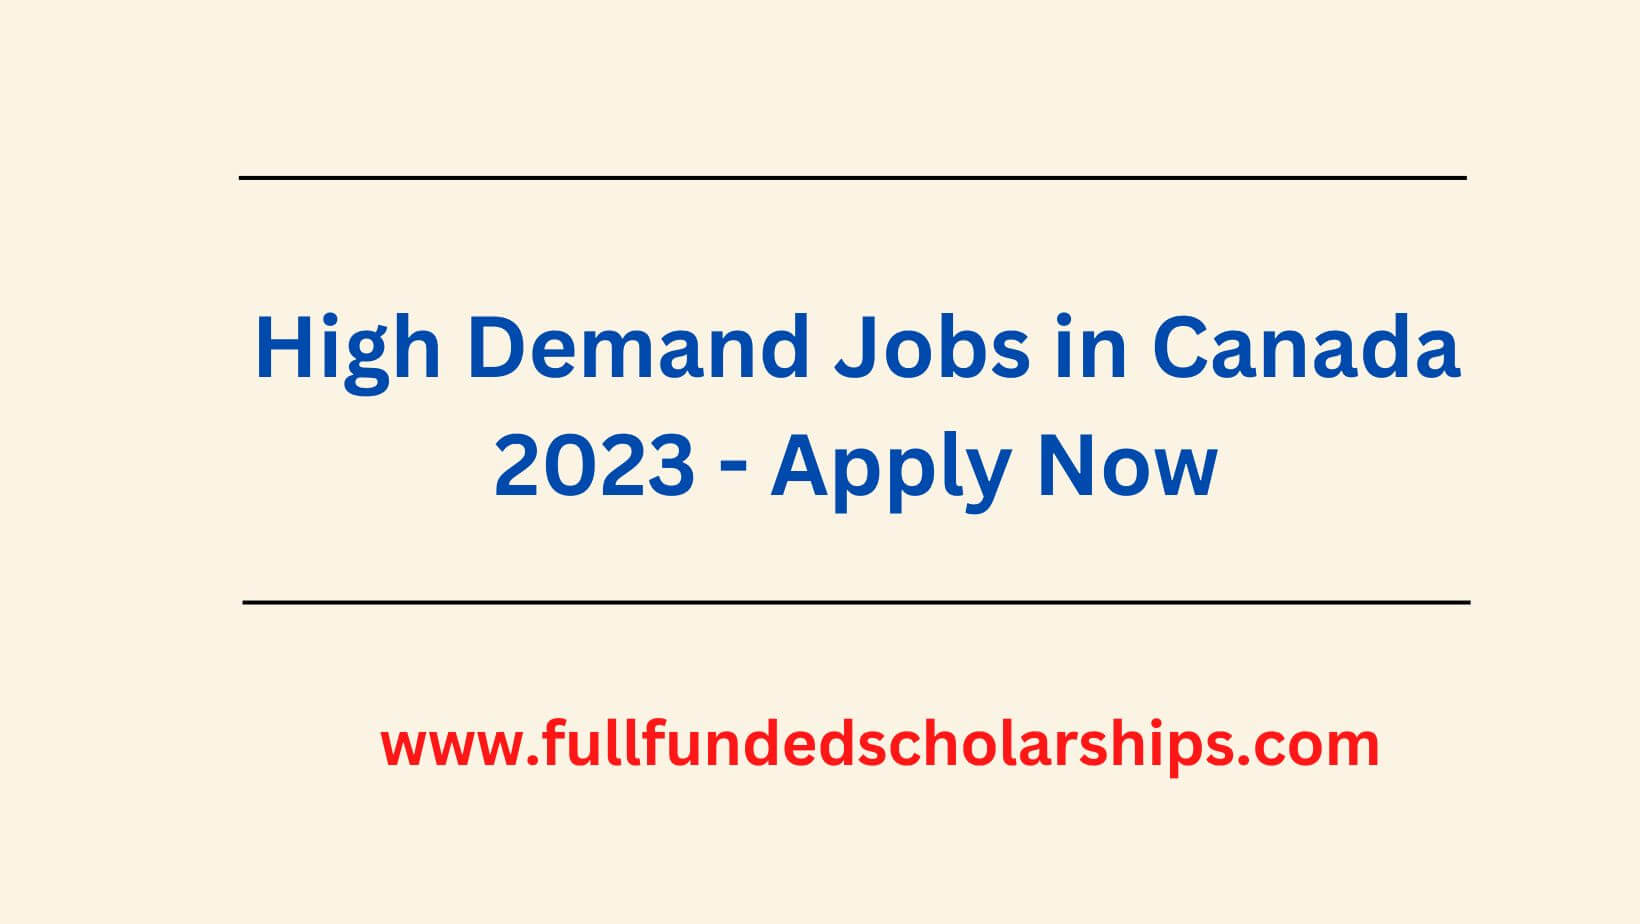 High Demand Jobs in Canada 2023 - Apply Now